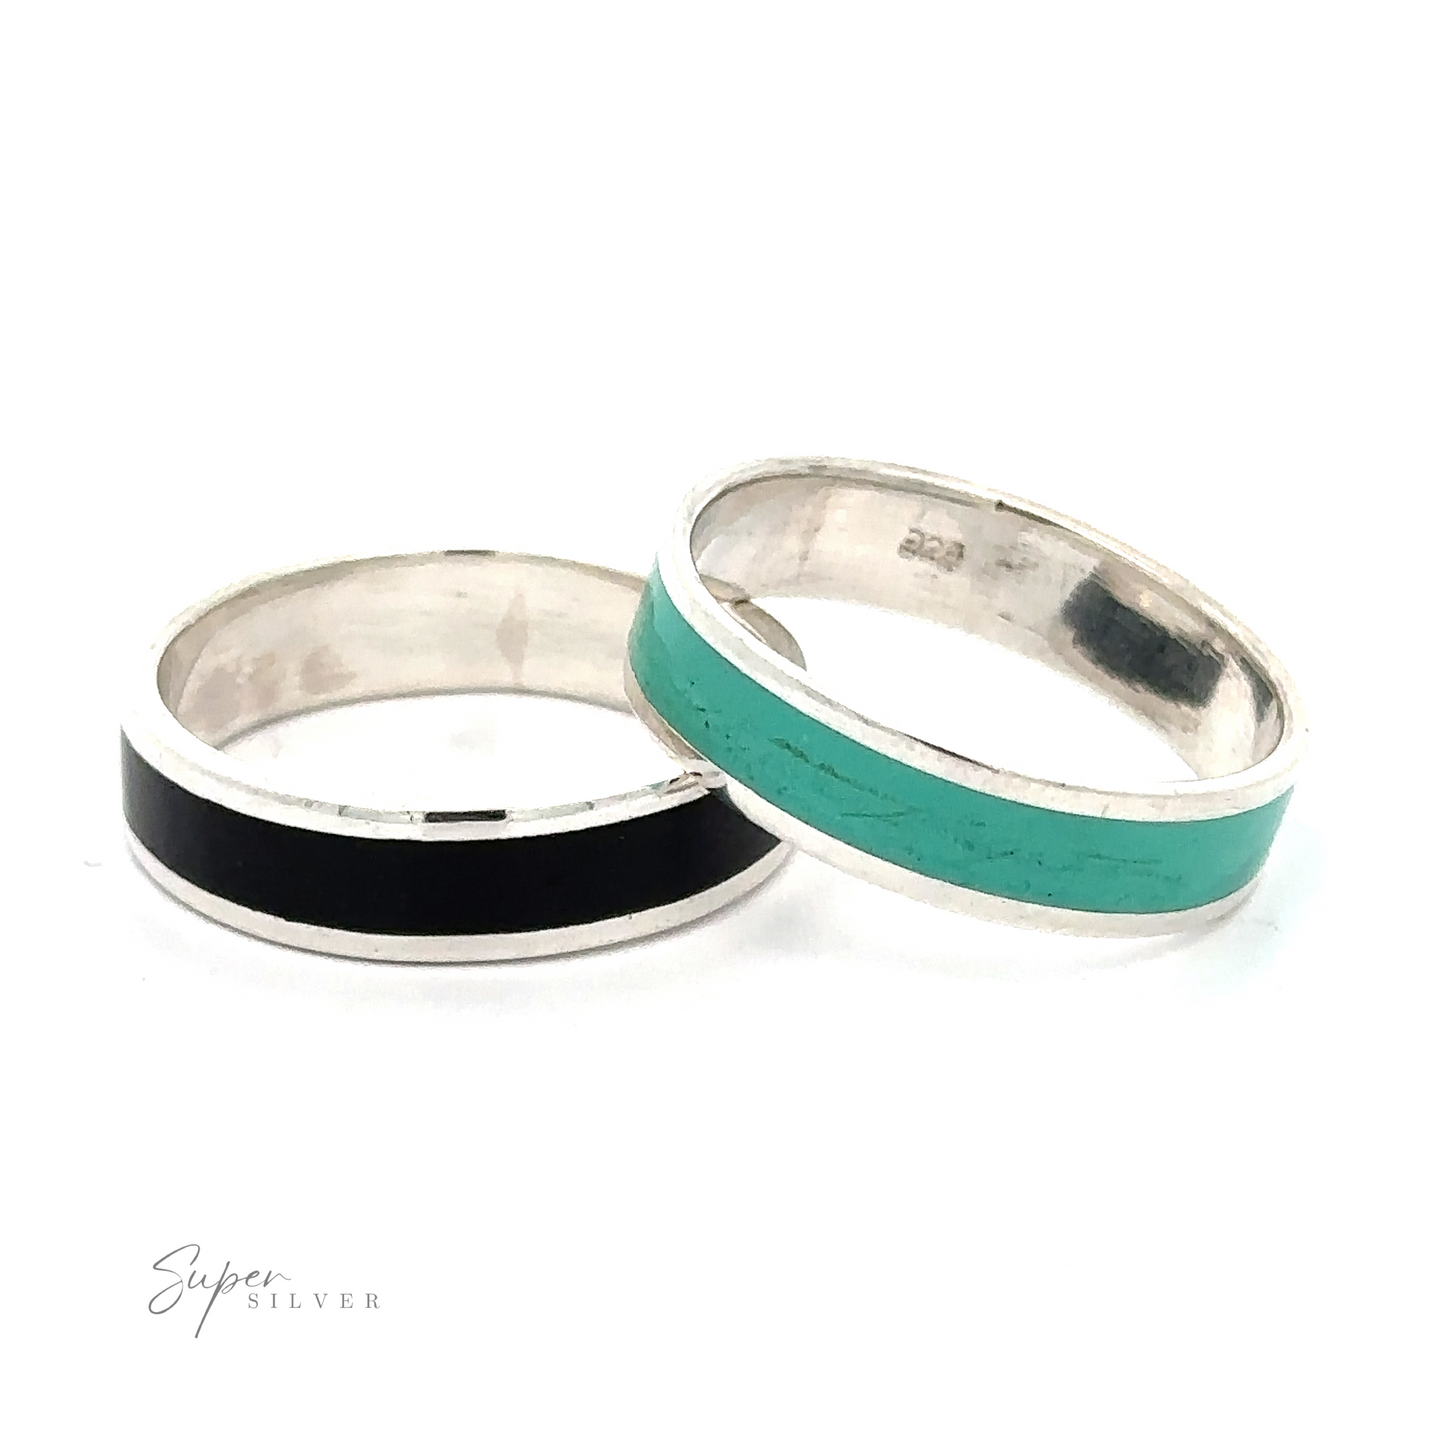 Two Sophisticated Inlay Bands with black onyx inlay and turquoise inlay on a white background.